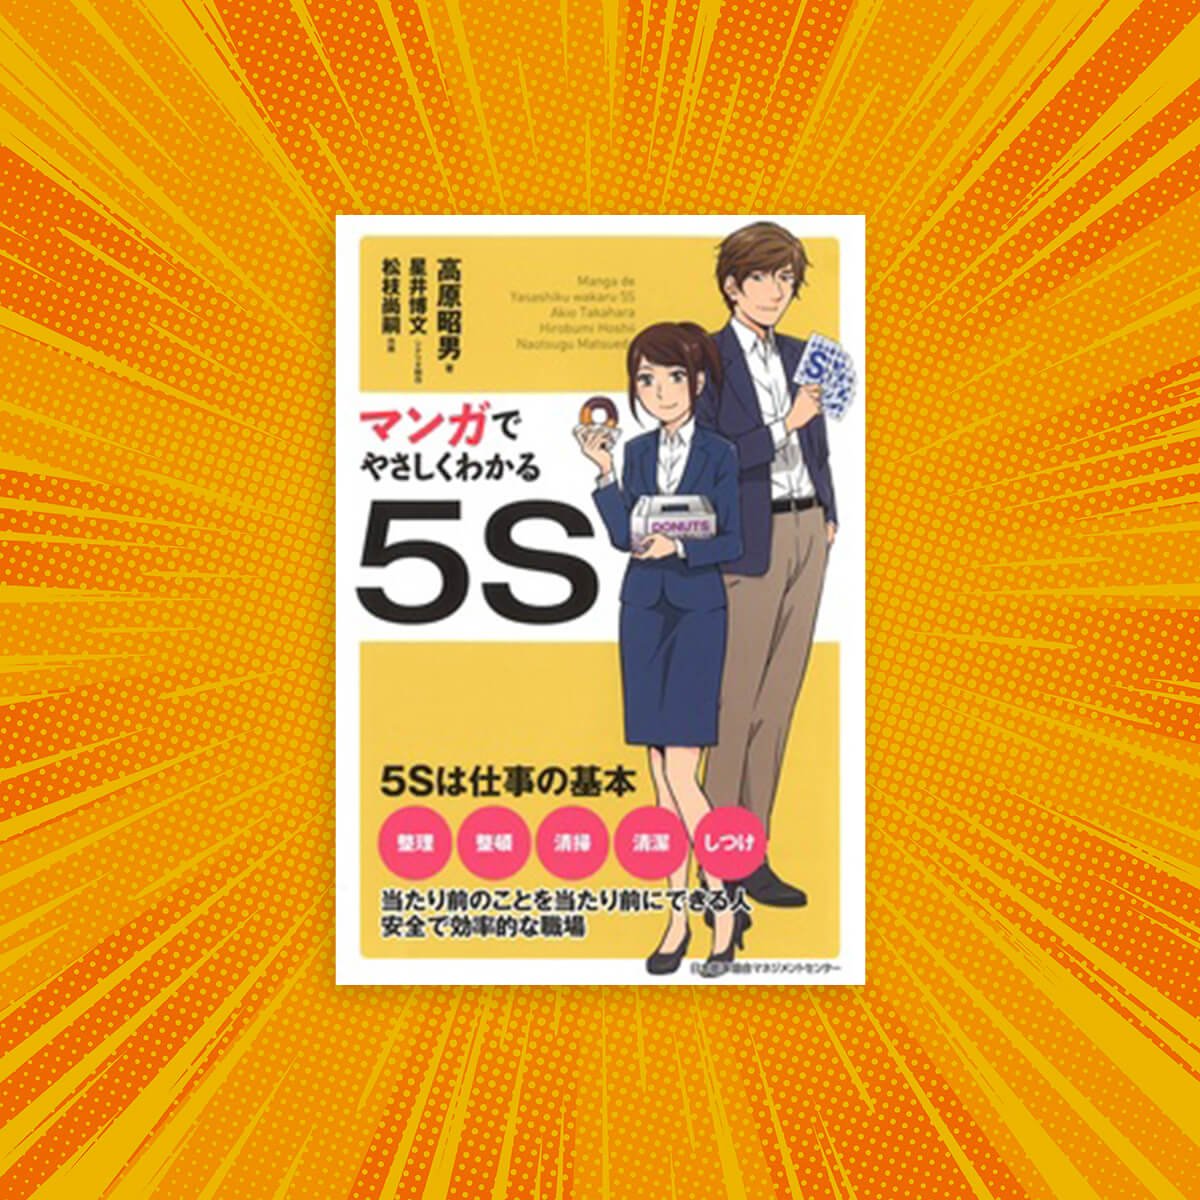 Easy reading through Manga | 5S in Operation Management